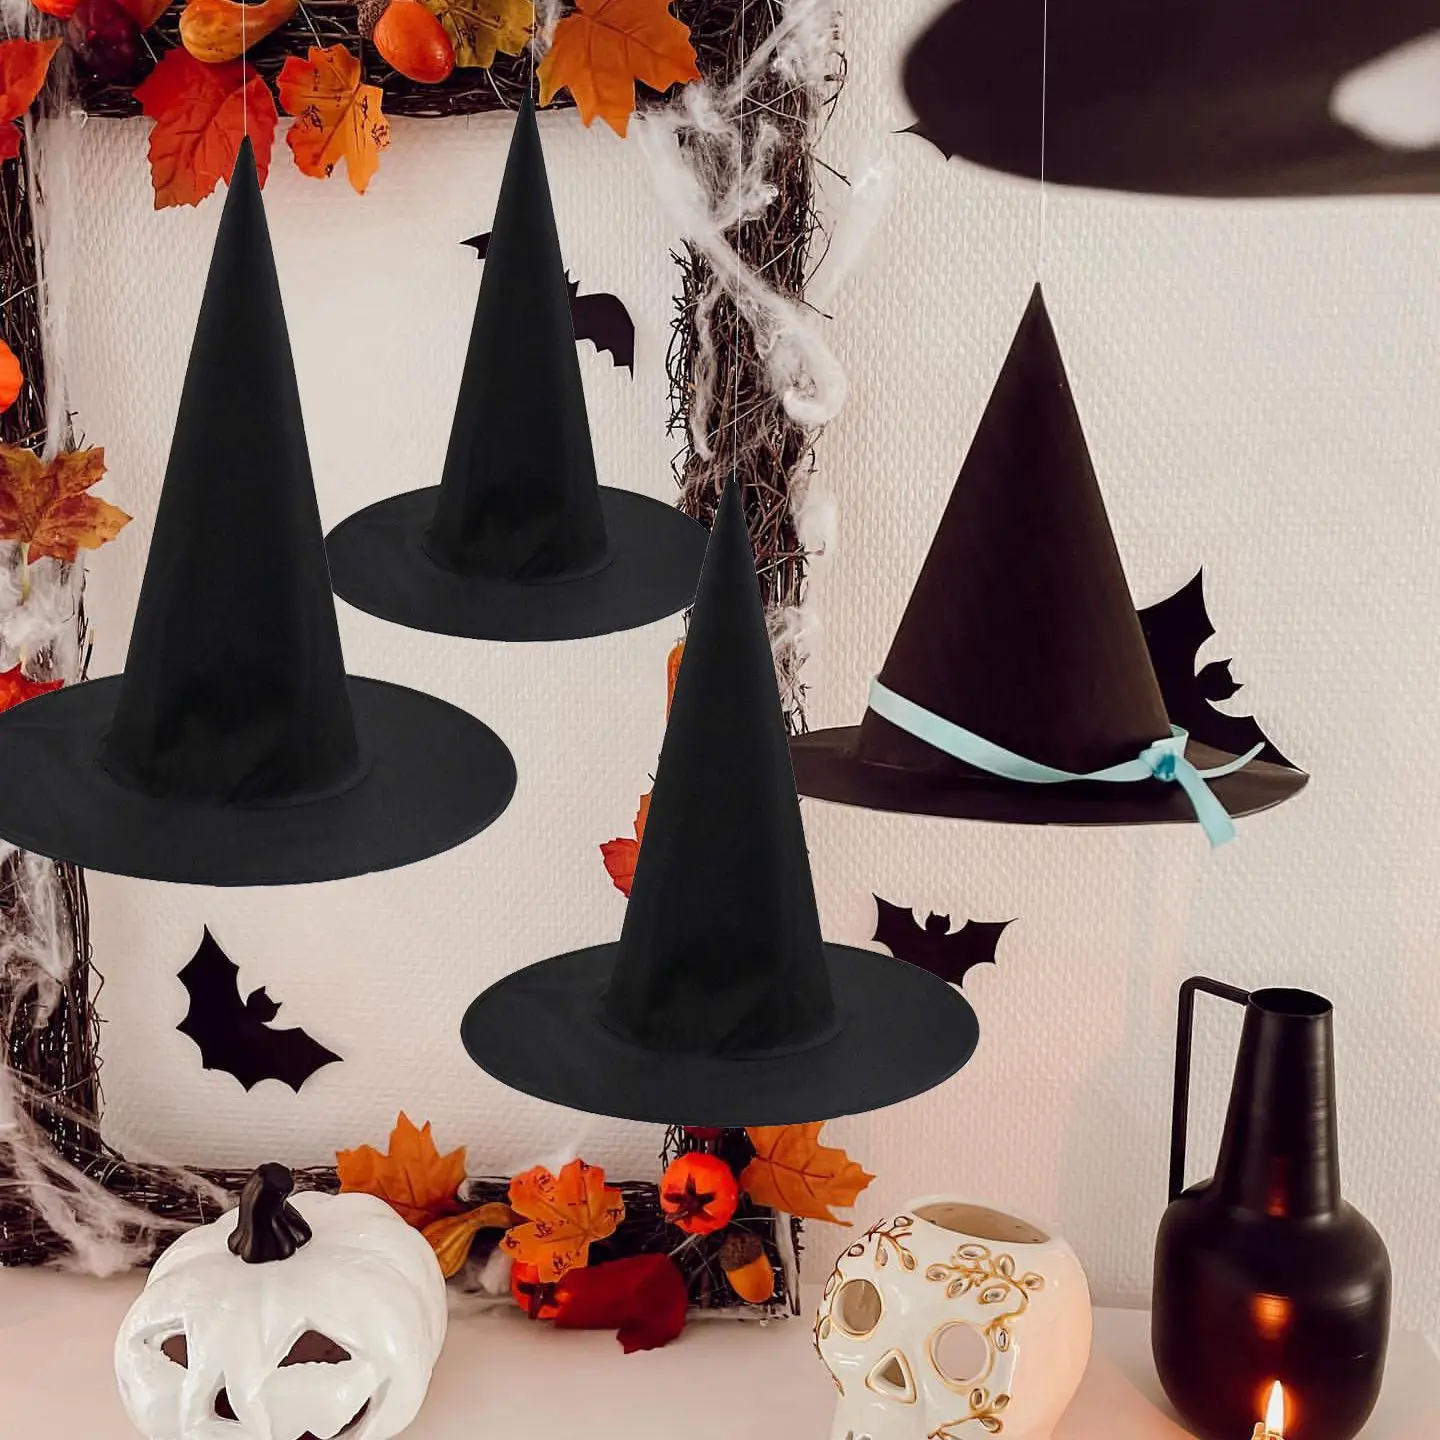 5Pcs Multi Size Halloween Witch Hat for Adults Kids Halloween Party Supply Cosplay Costume Decorations Black Wizard Caps